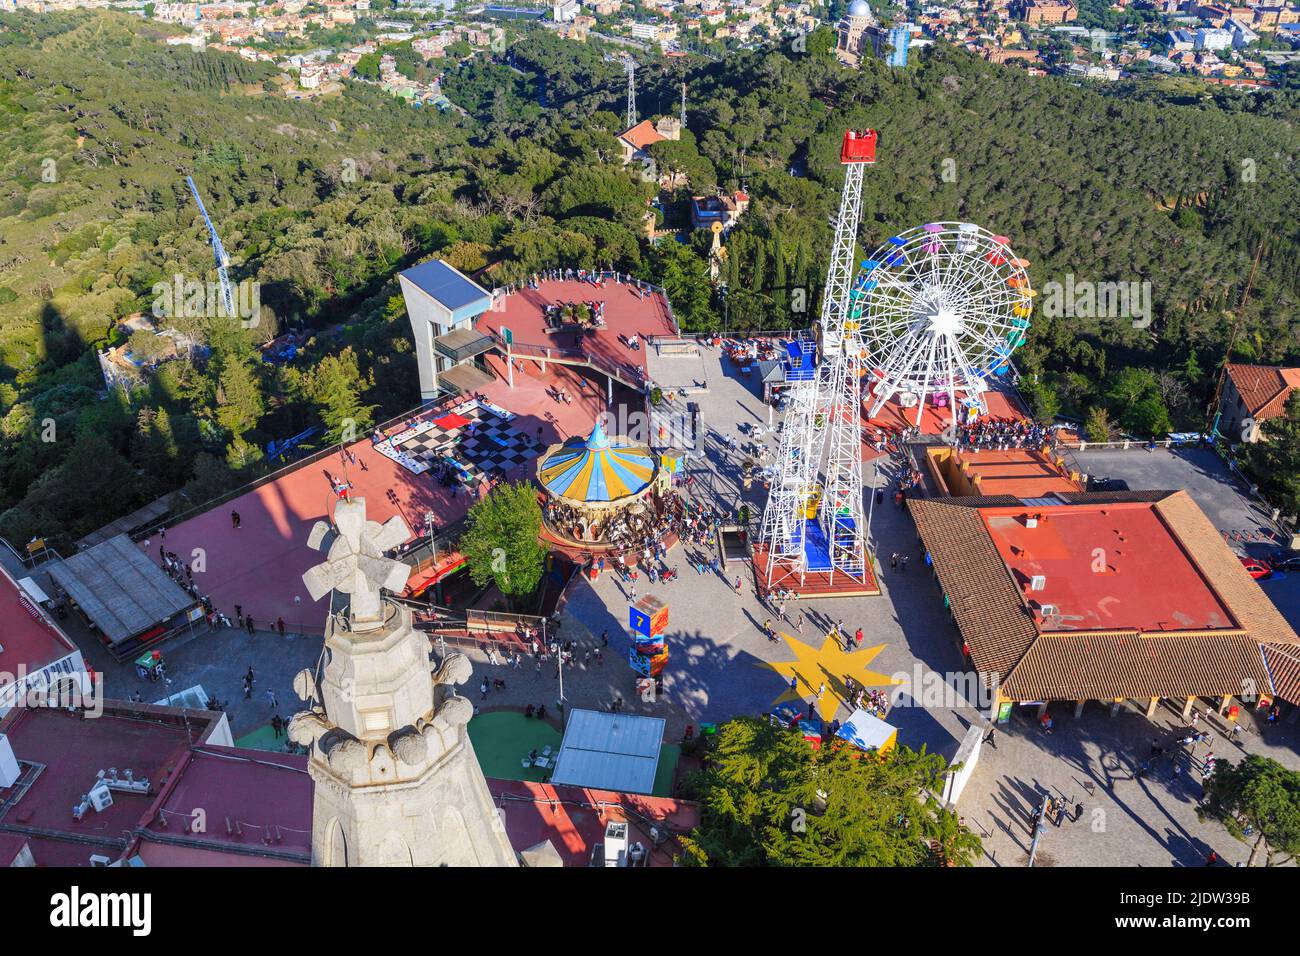 BARCELONA, SPAIN - MAY 13, 2017: This is an aerial view of the Amusement Park on Mount Tibidabo. Stock Photo